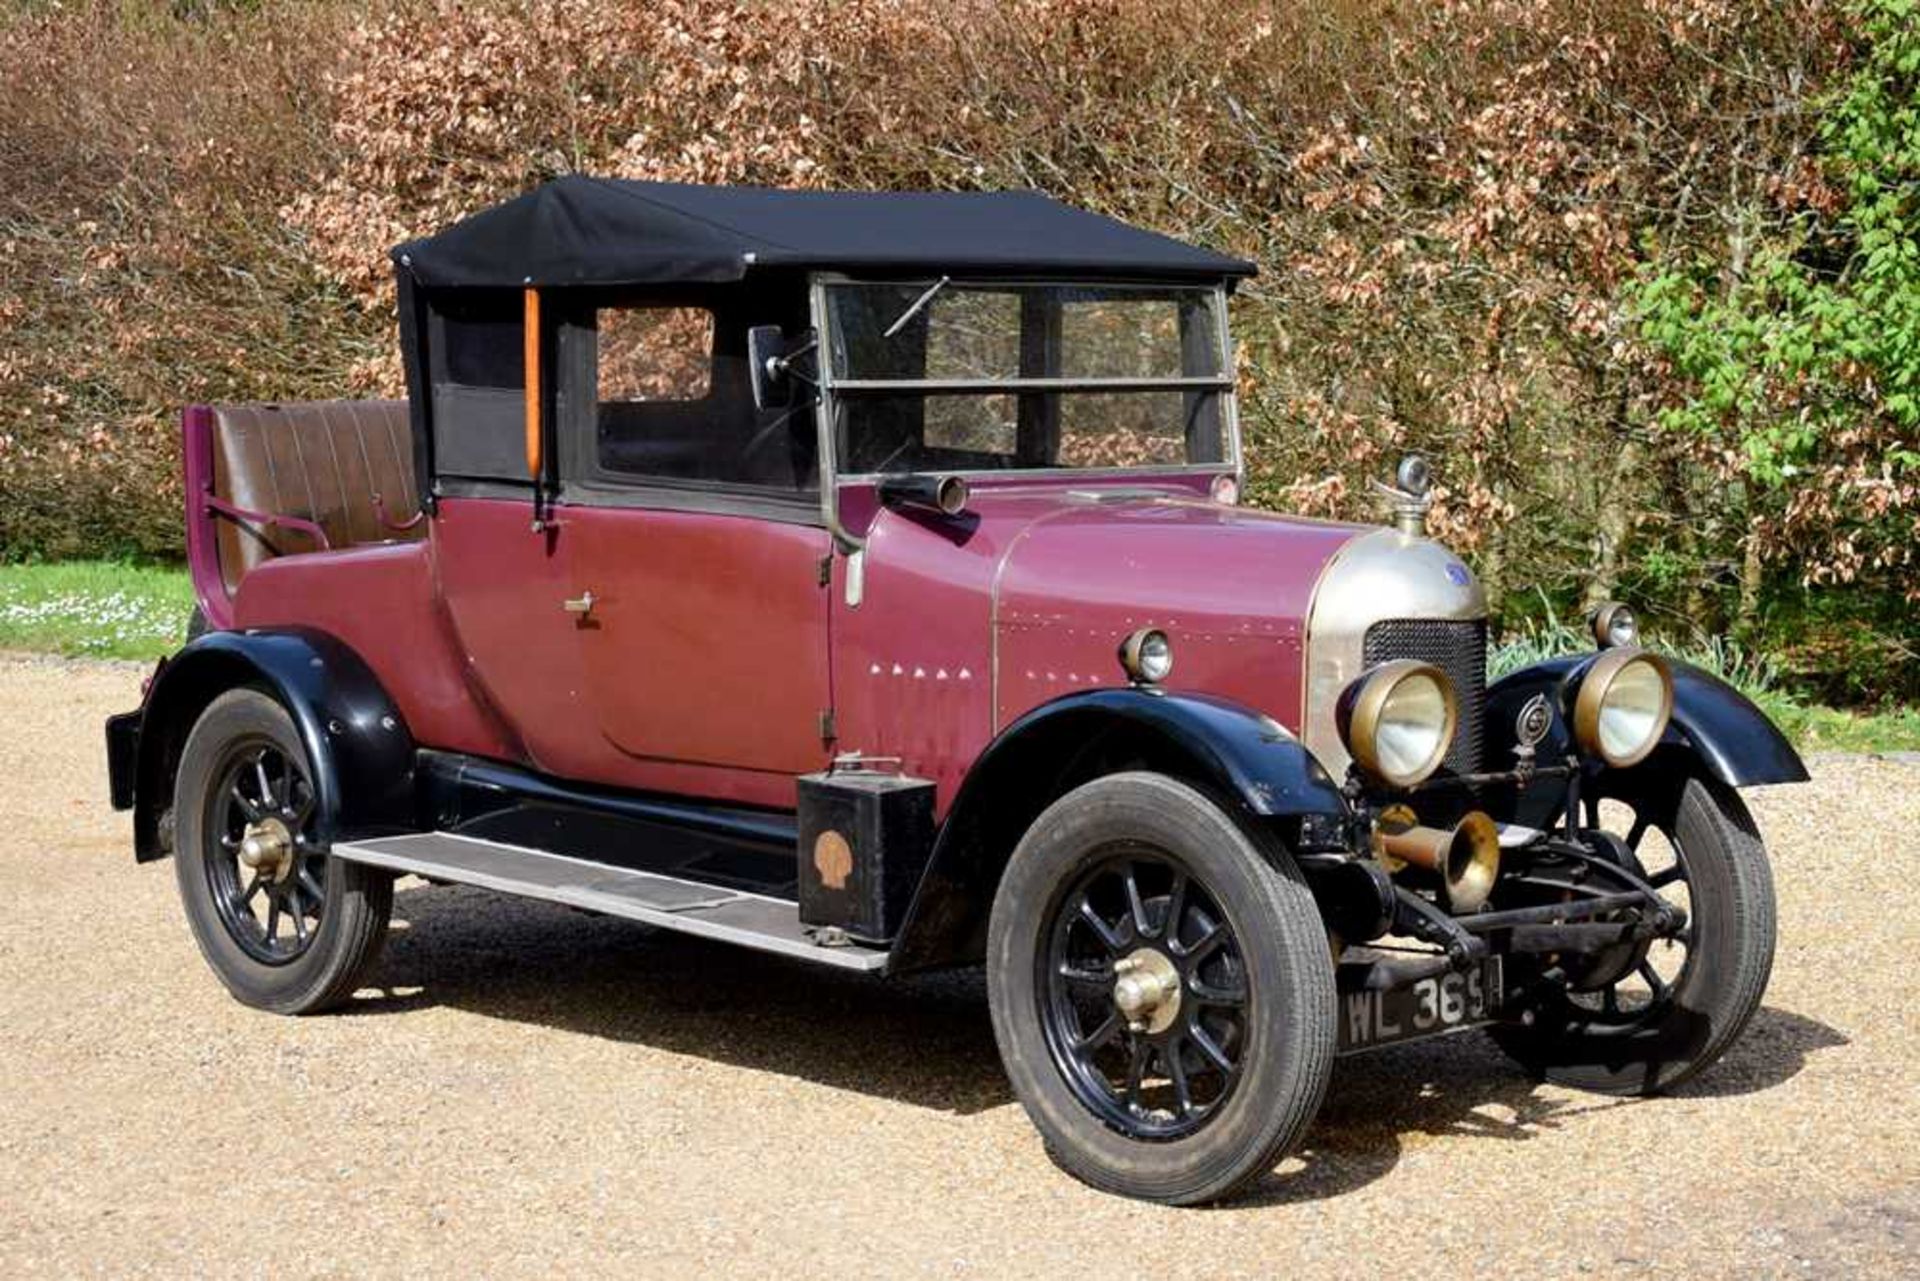 1926 Morris Oxford 'Bullnose' 2-Seat Tourer with Dickey